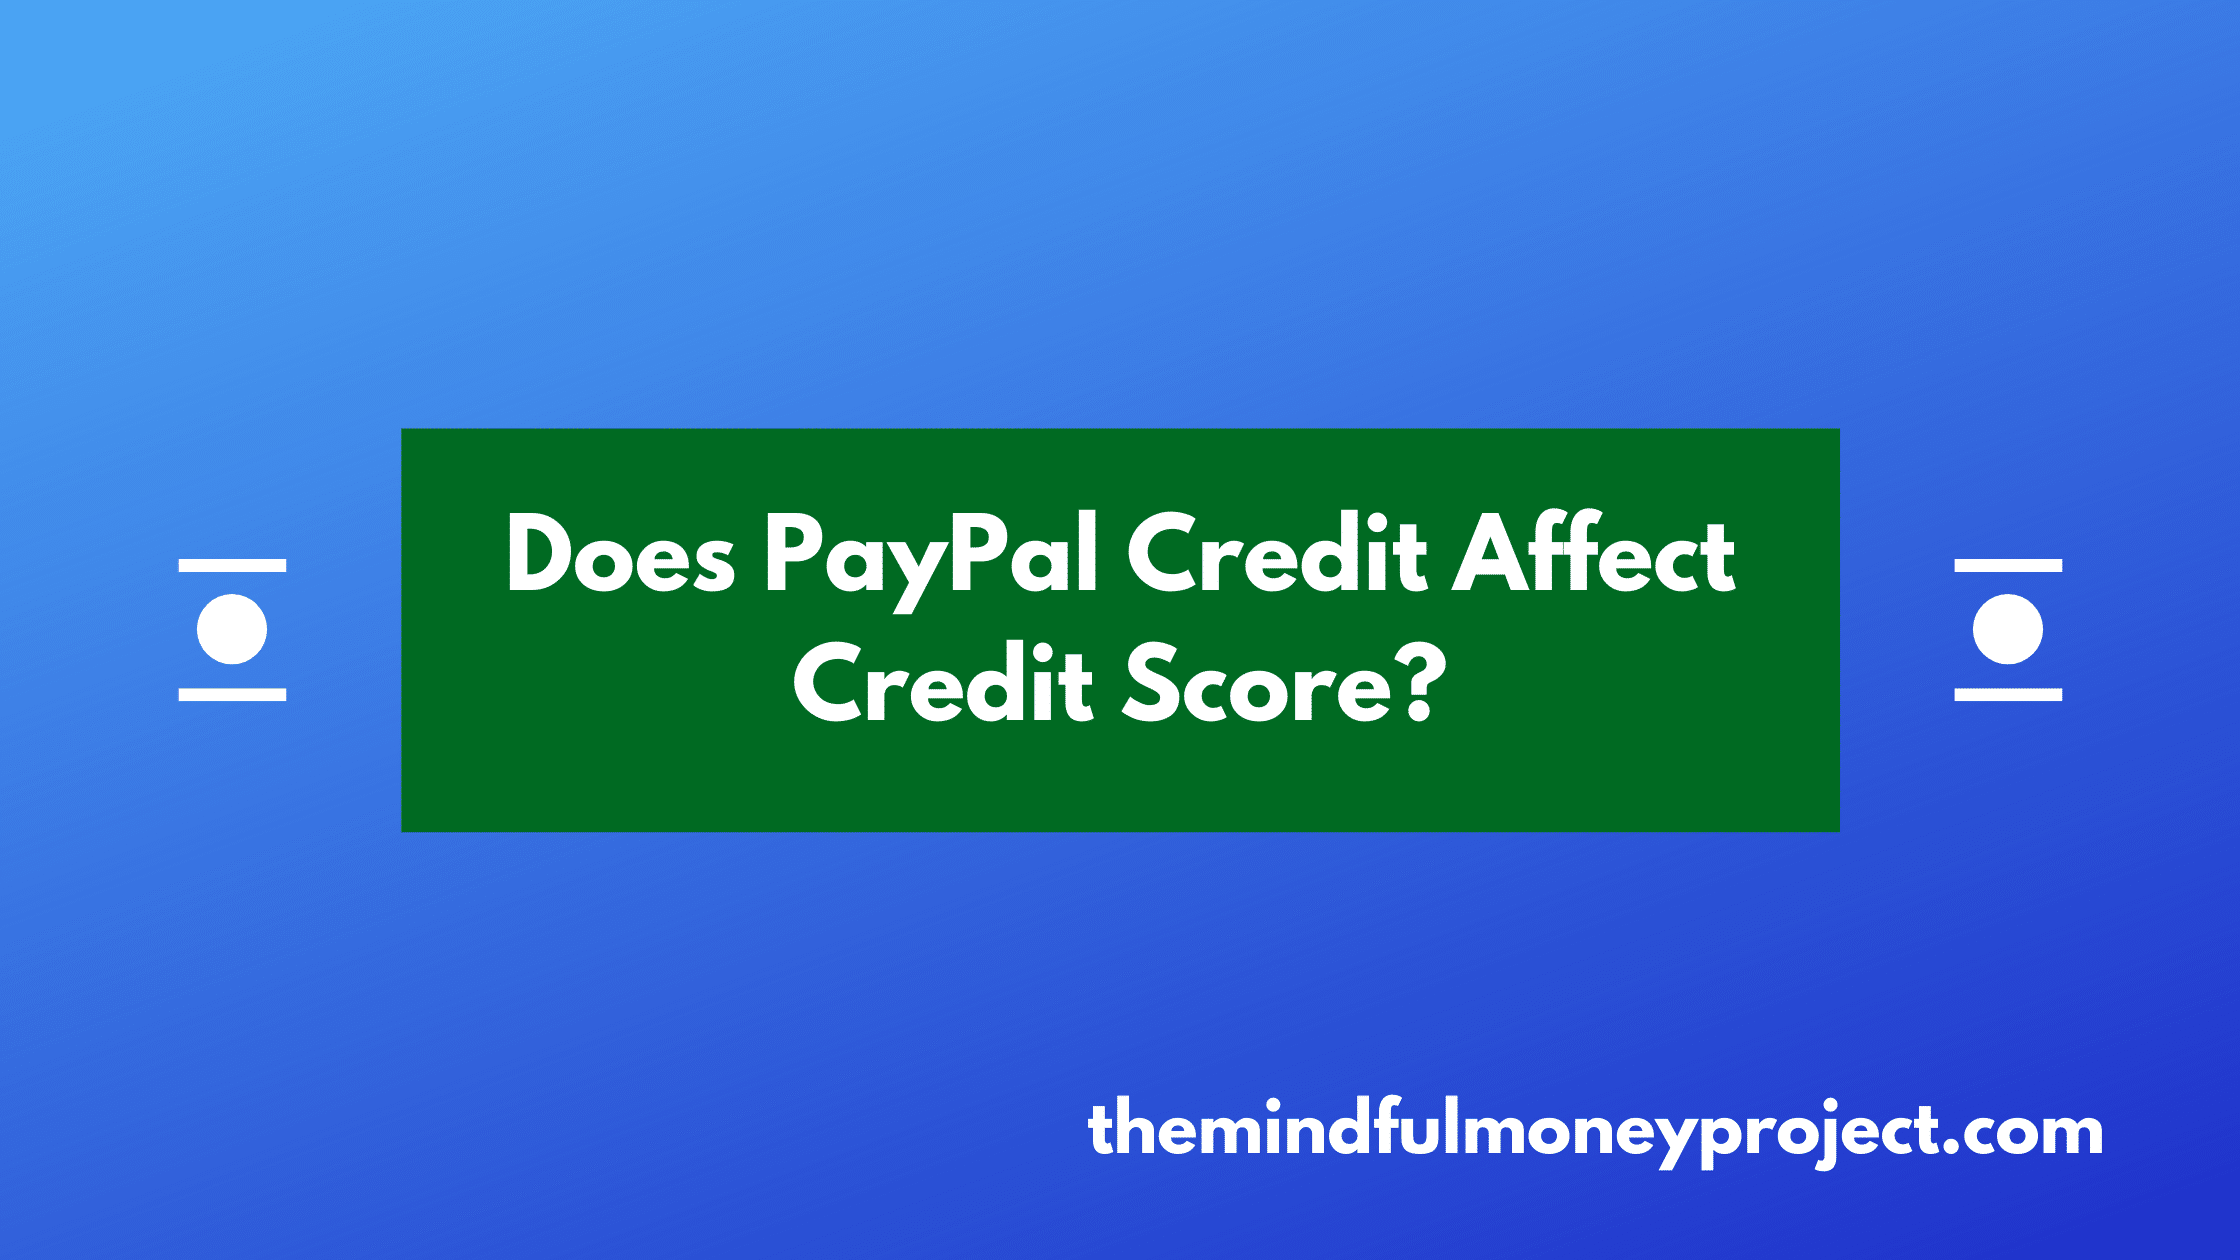 Does PayPal Credit Affect Credit Score?